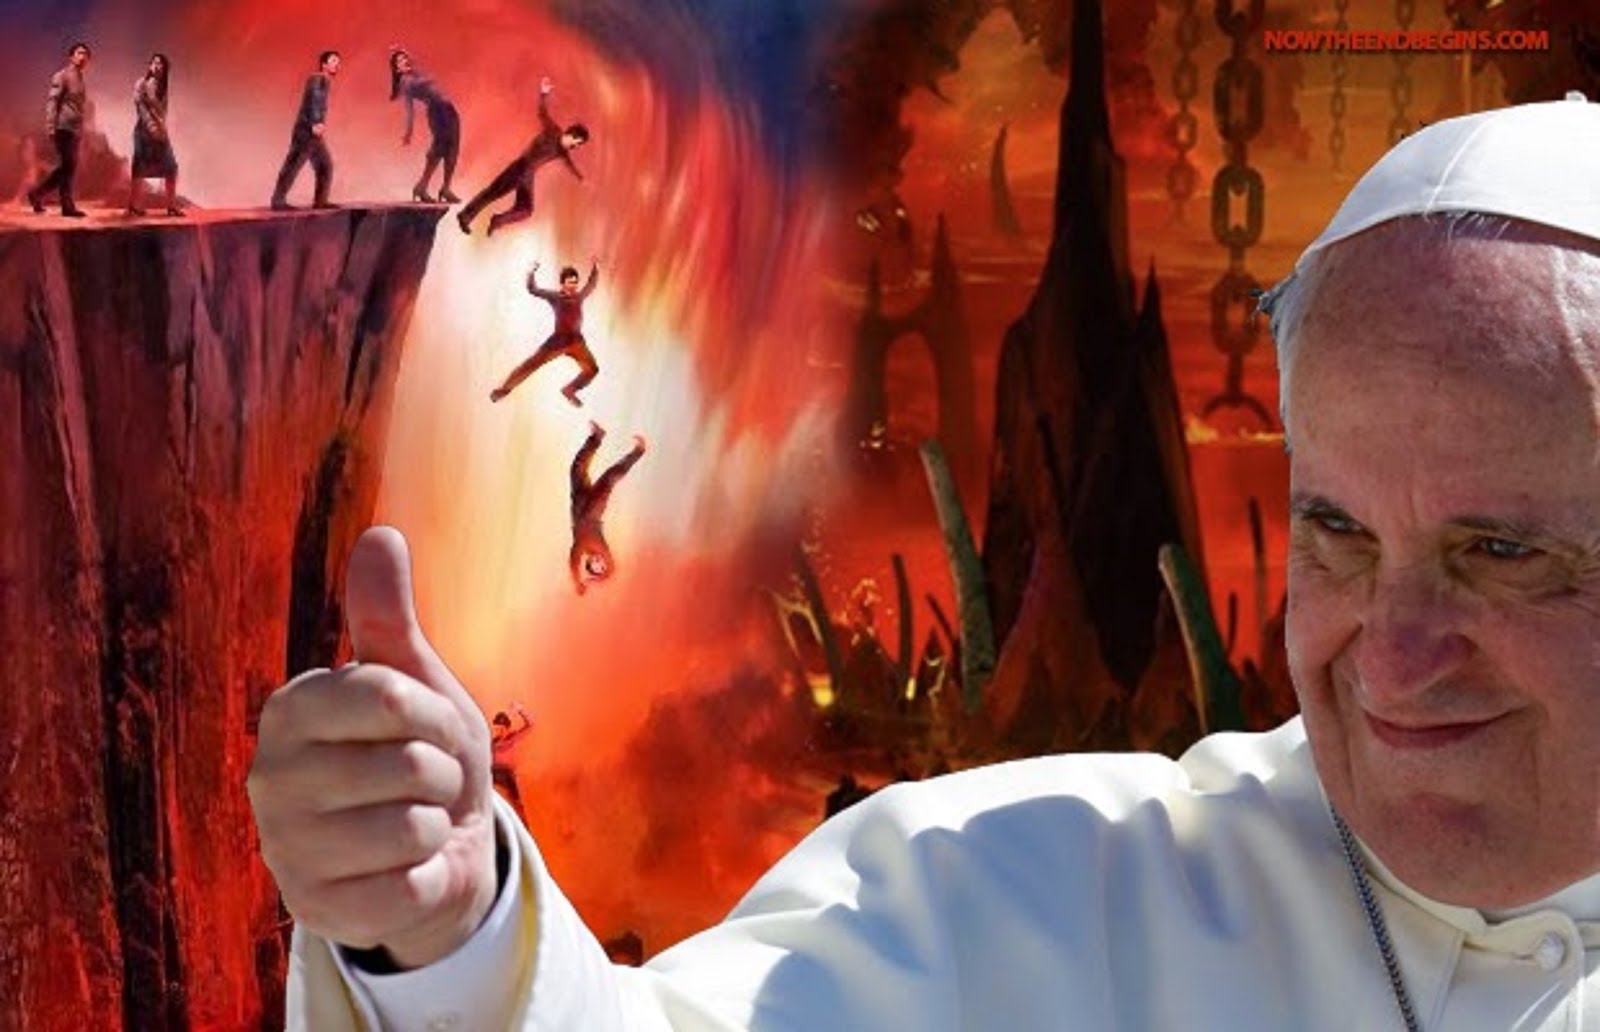 POPE FRANCIS IS THE ANTI-CHRIST